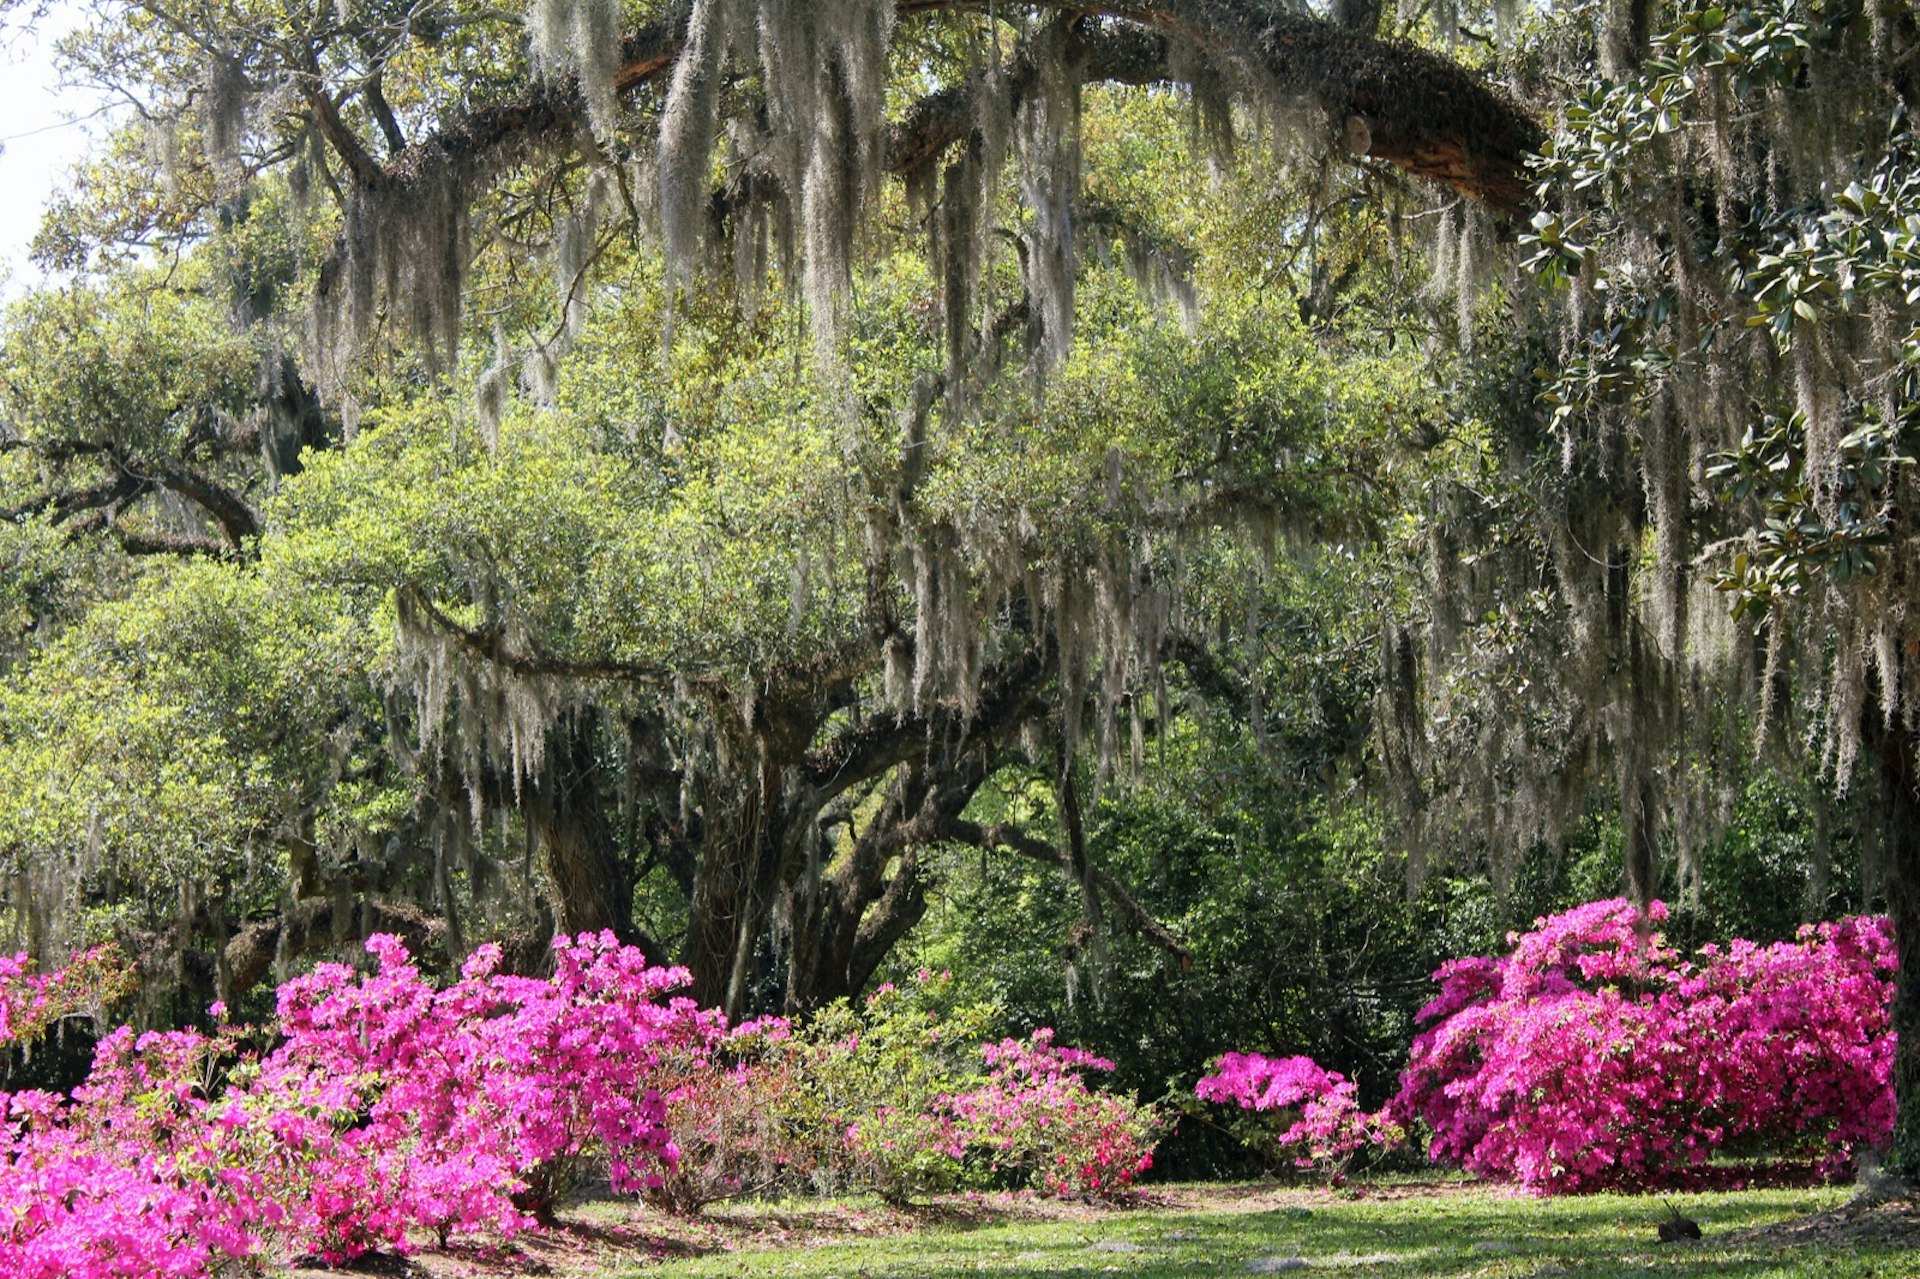 A collection of pink azaleas in full bloom surrounded by huge oaks draped in Spanish moss on a bright, sunny day; day trips New Orleans 